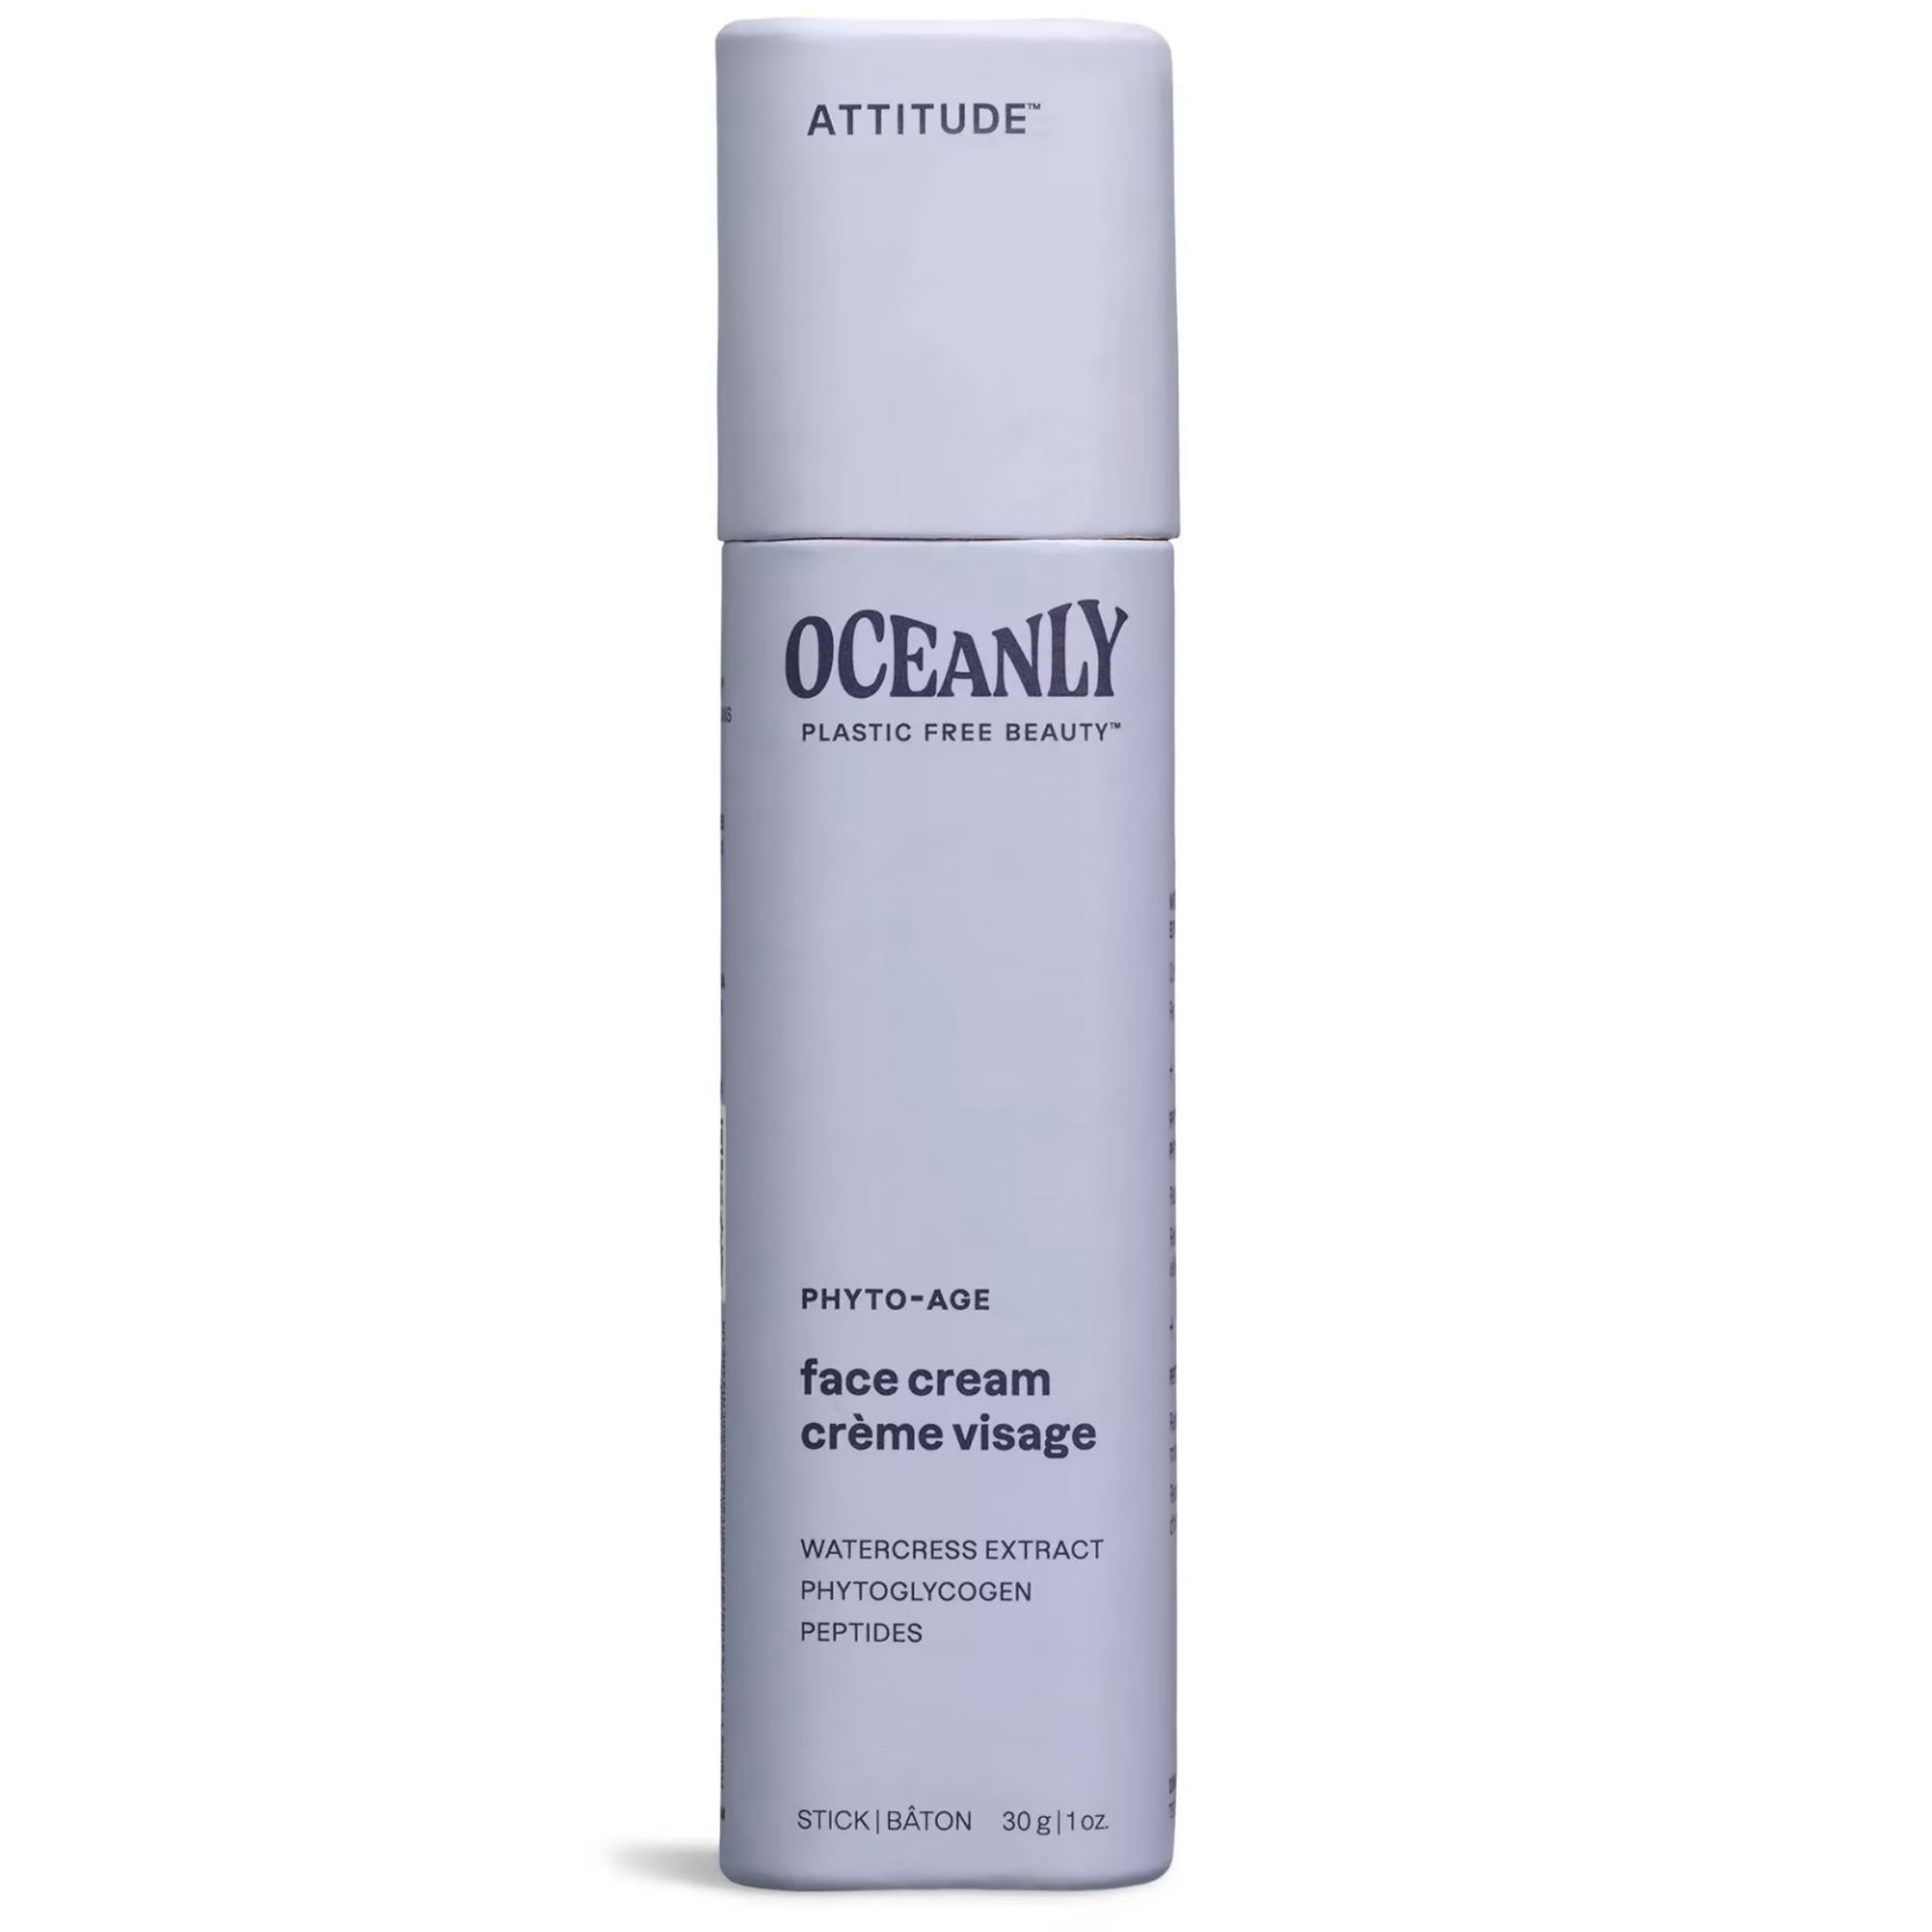 Attitude Oceanly Anti-Aging Solid Face Cream 30g tube - with watercress extract, phytoglycogen and peptides. Phyto-Age product line - 100% plastic free packaging. 